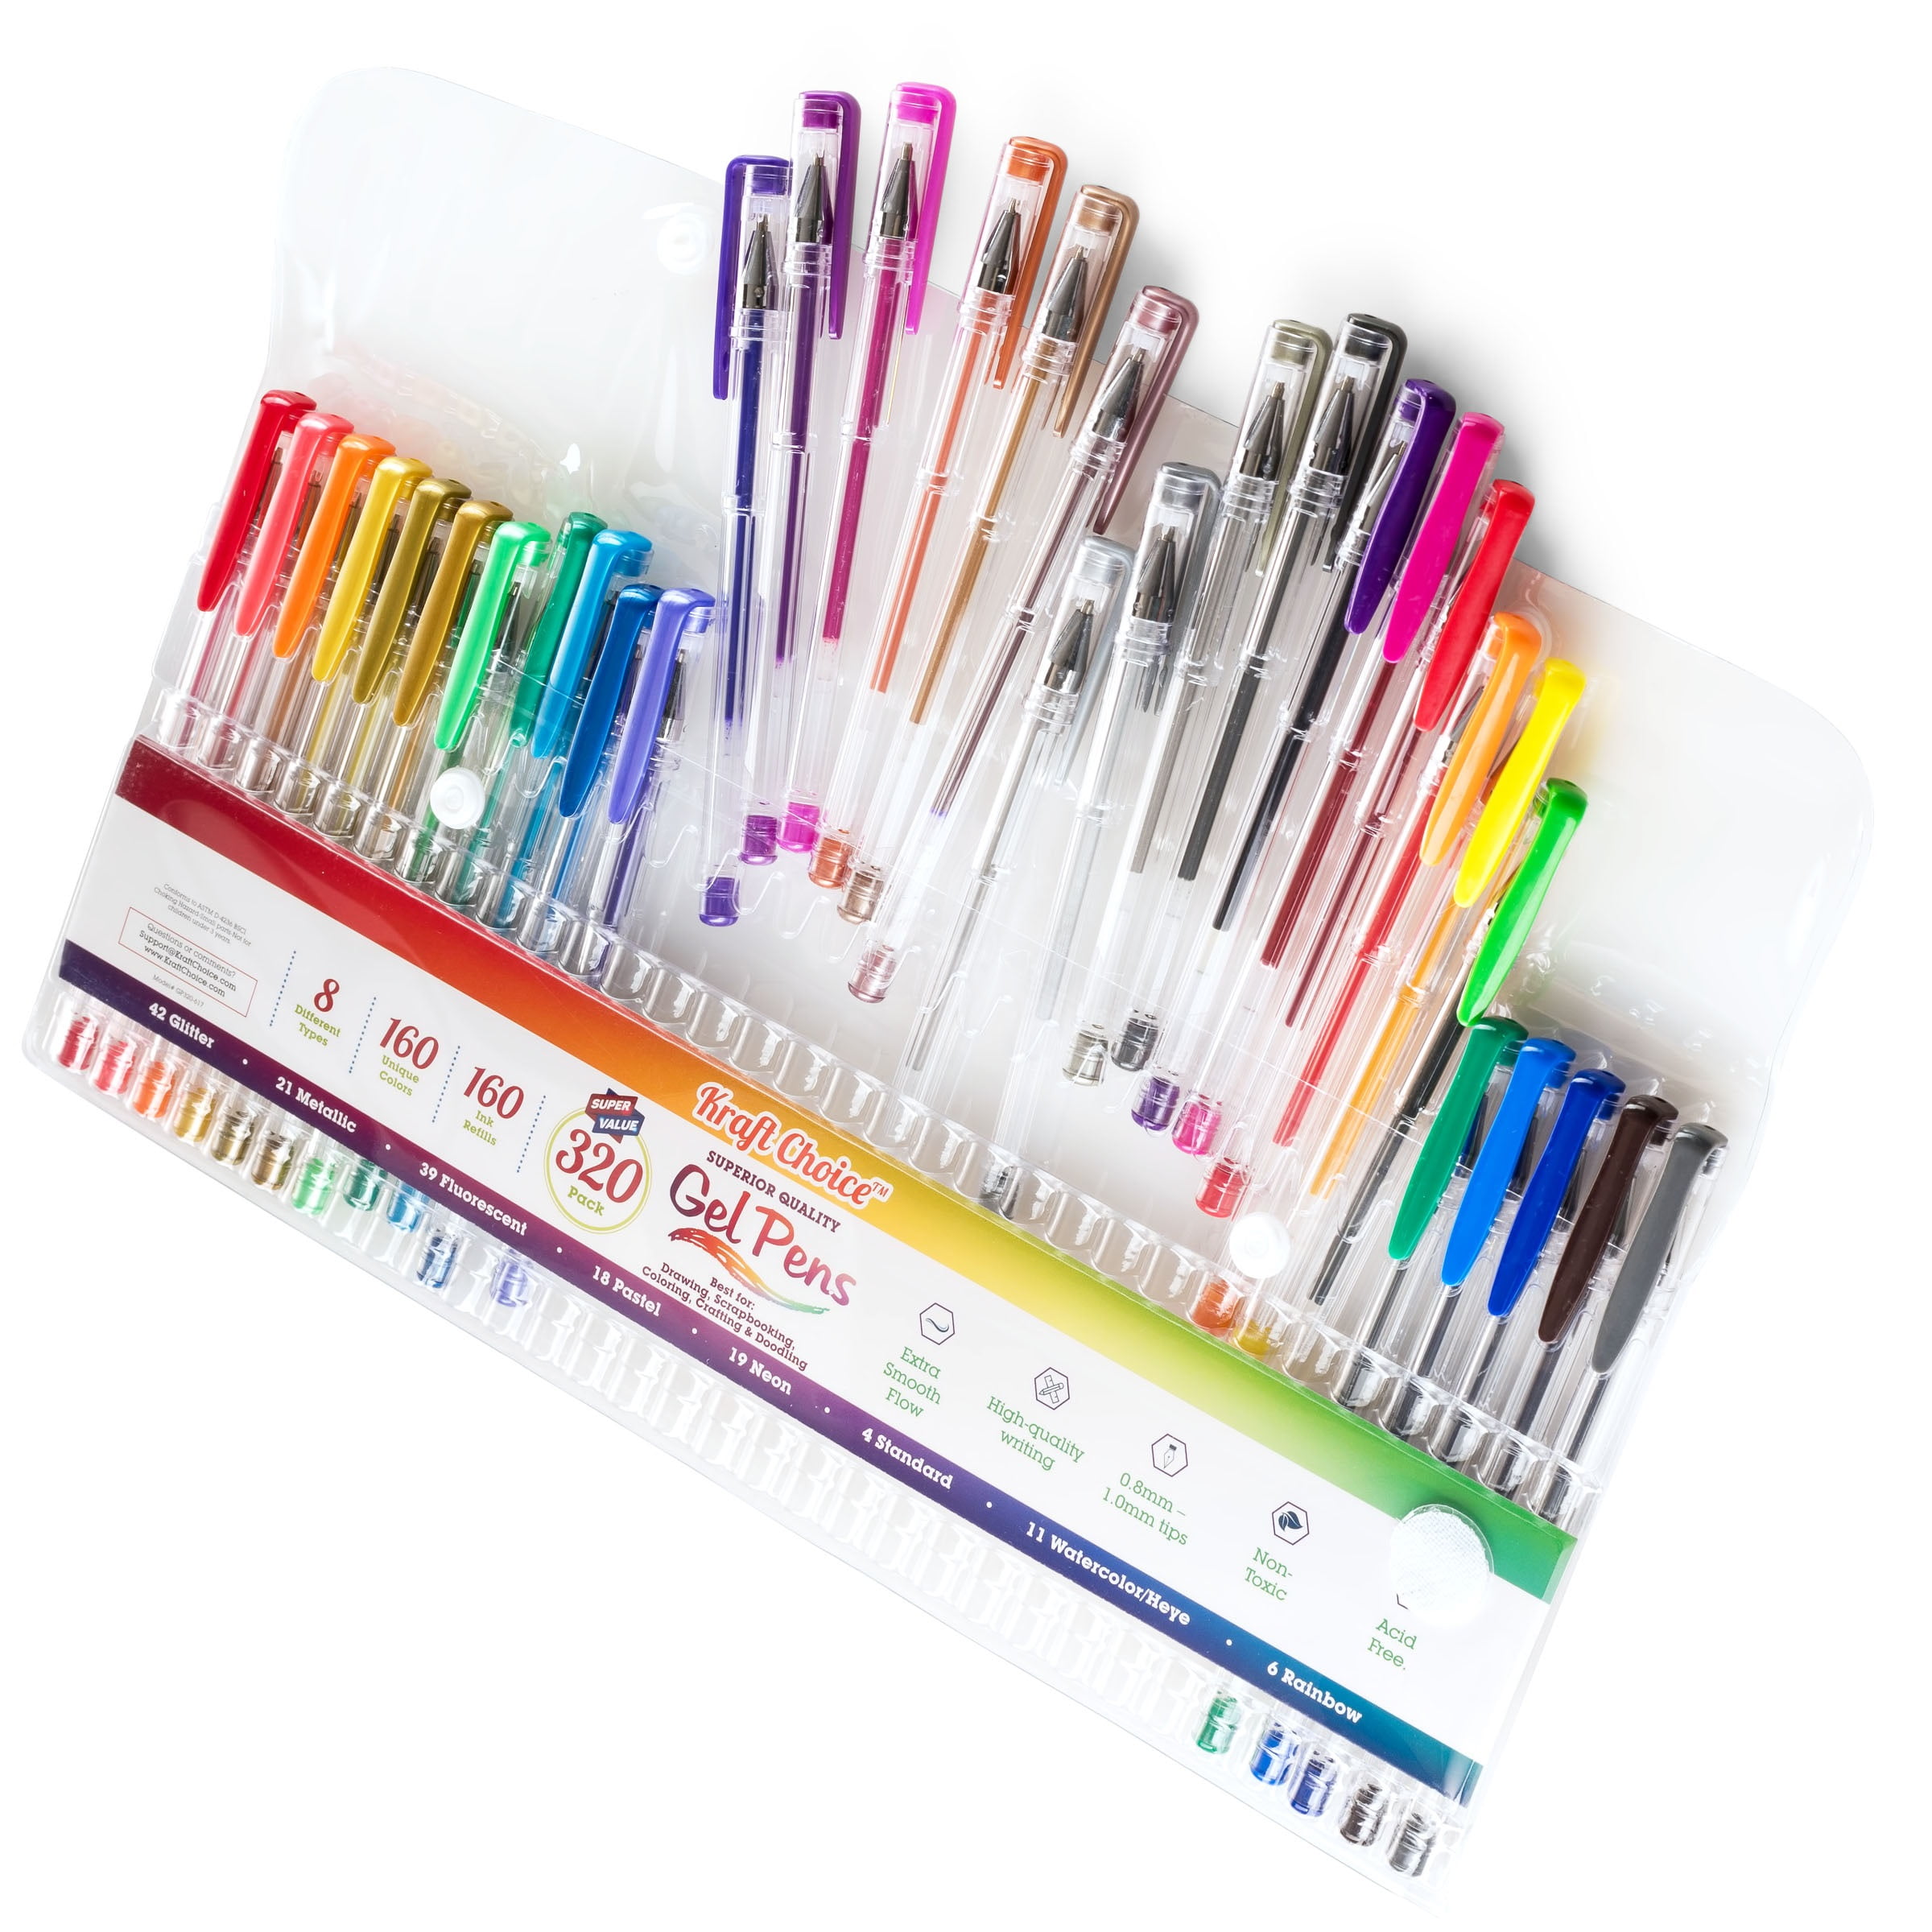 Oficrafted 160 Pack Gel Pen Sets for Adult Coloring Books, Colored Gel Pens  with 40% More Ink, Gel Coloring Pens with Travel Case for Artists and Kids